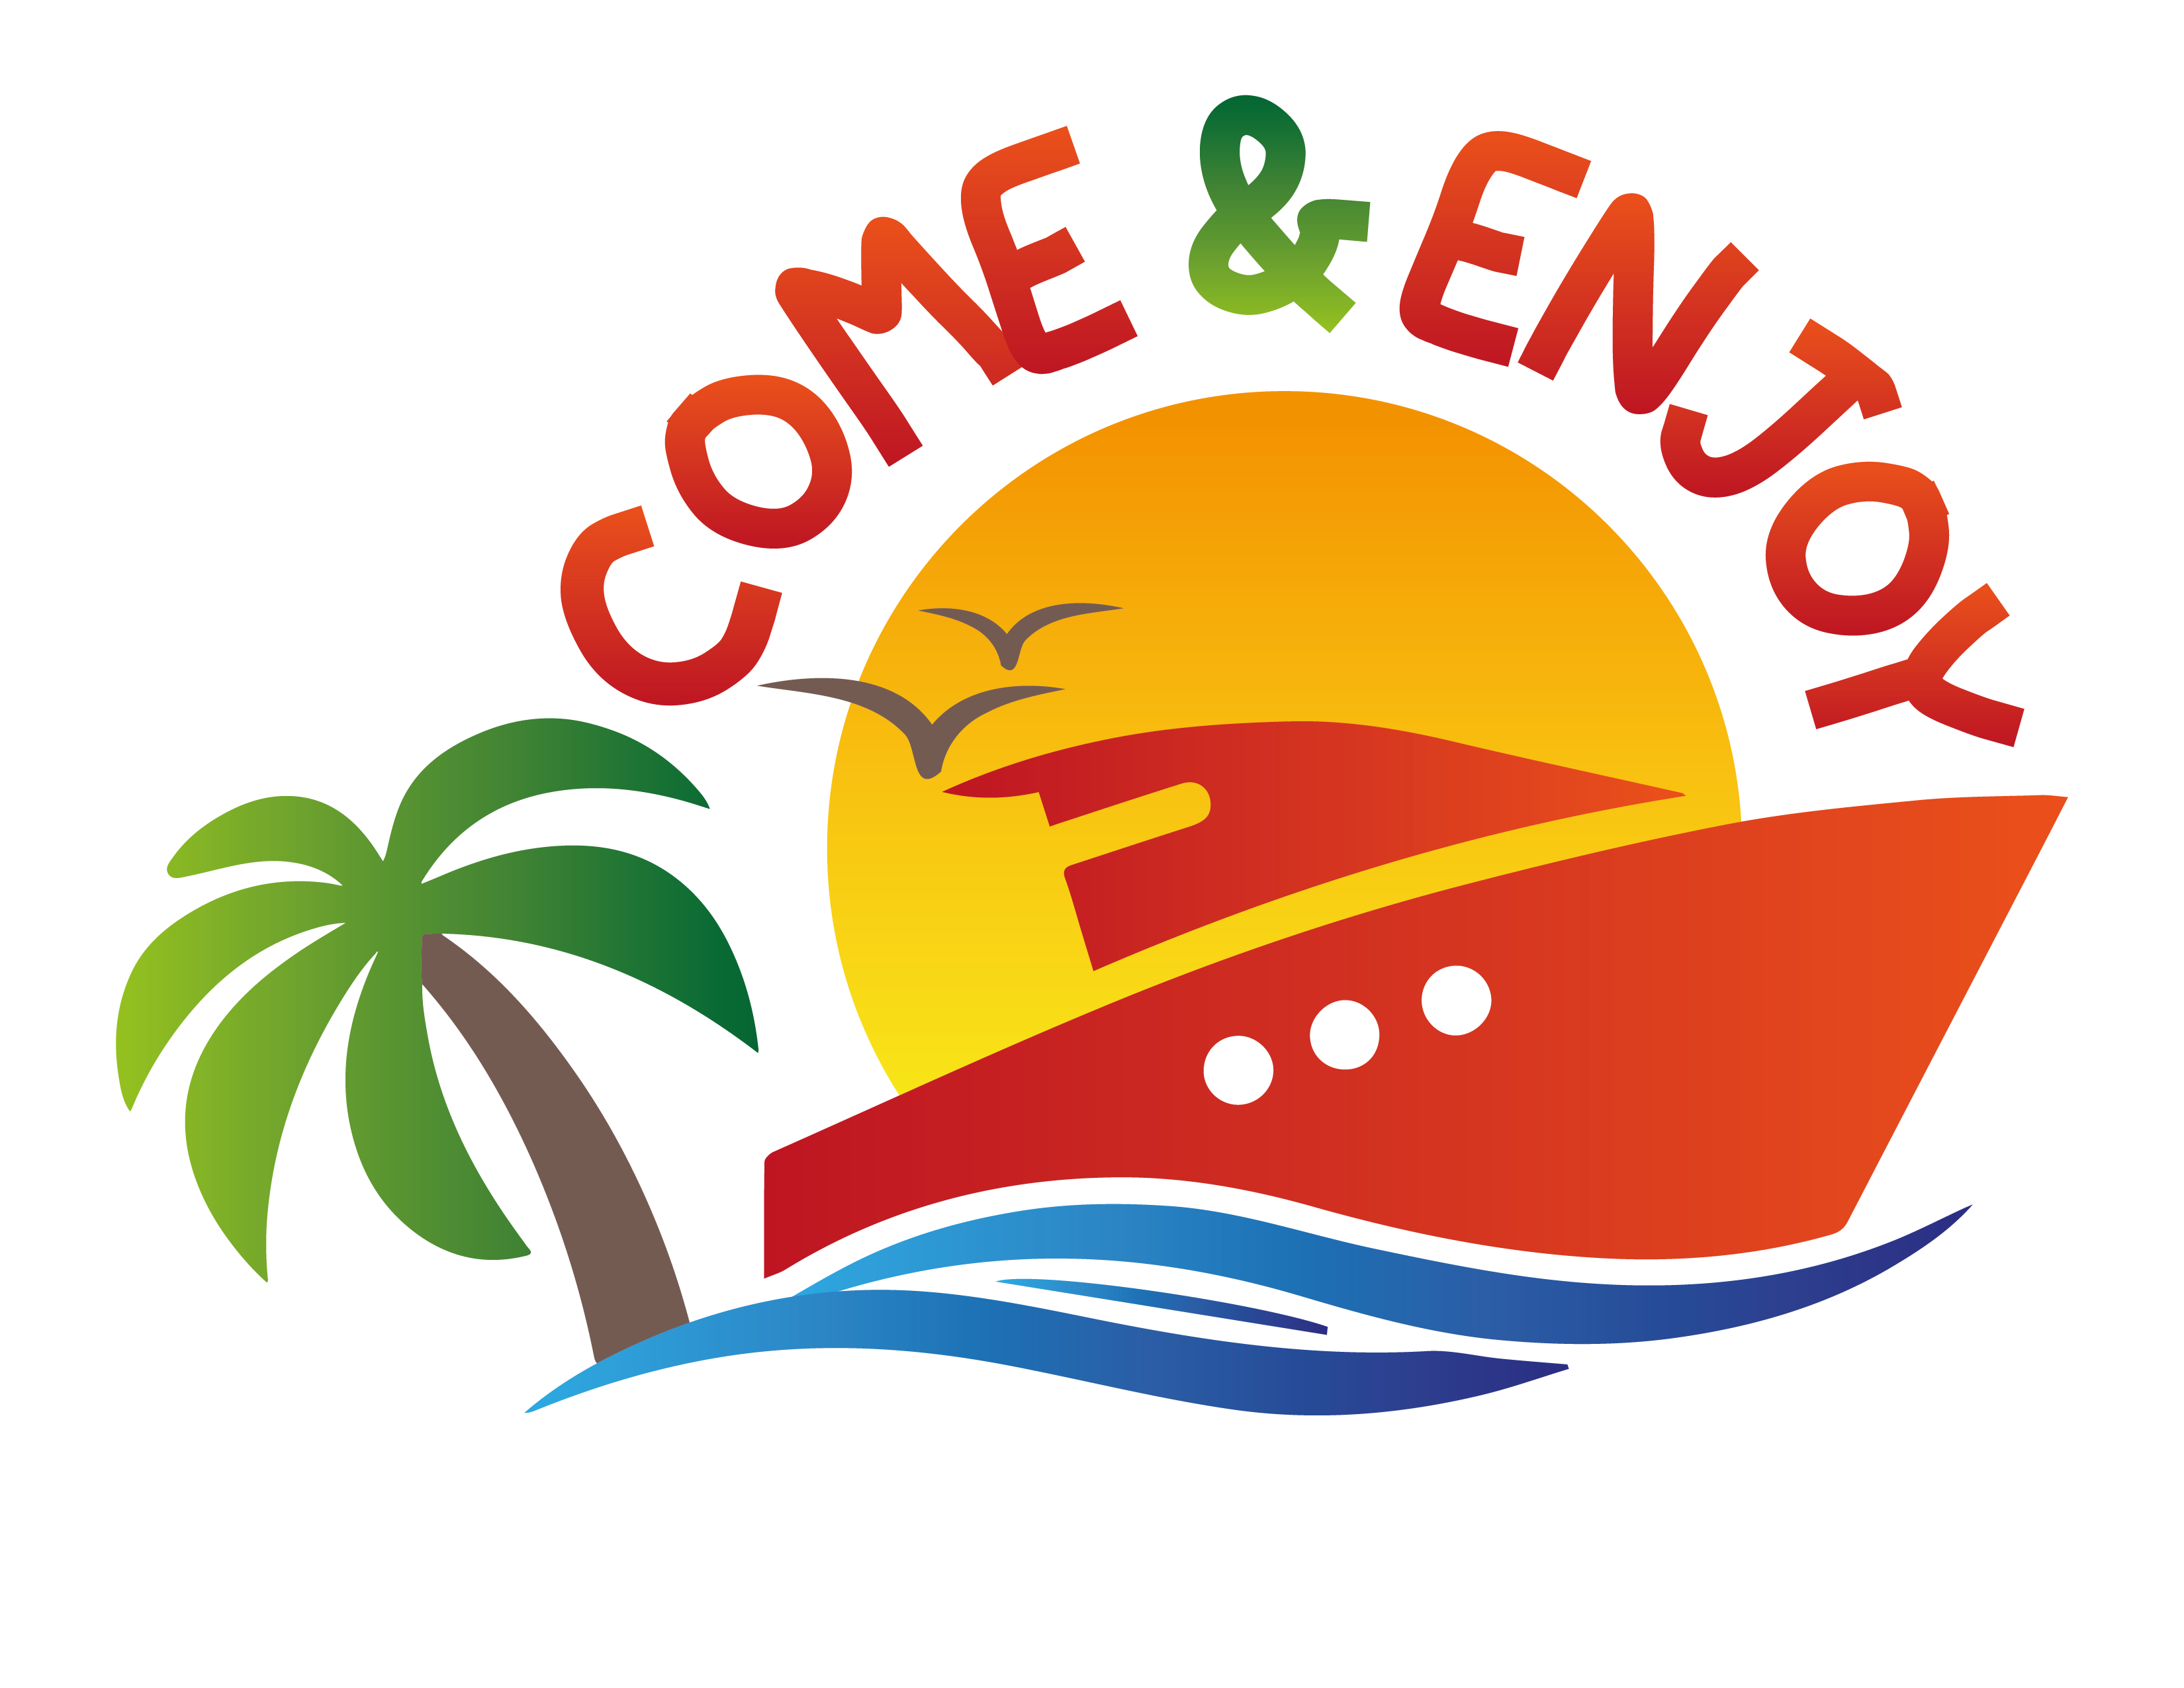 Come & enjoy Water sports